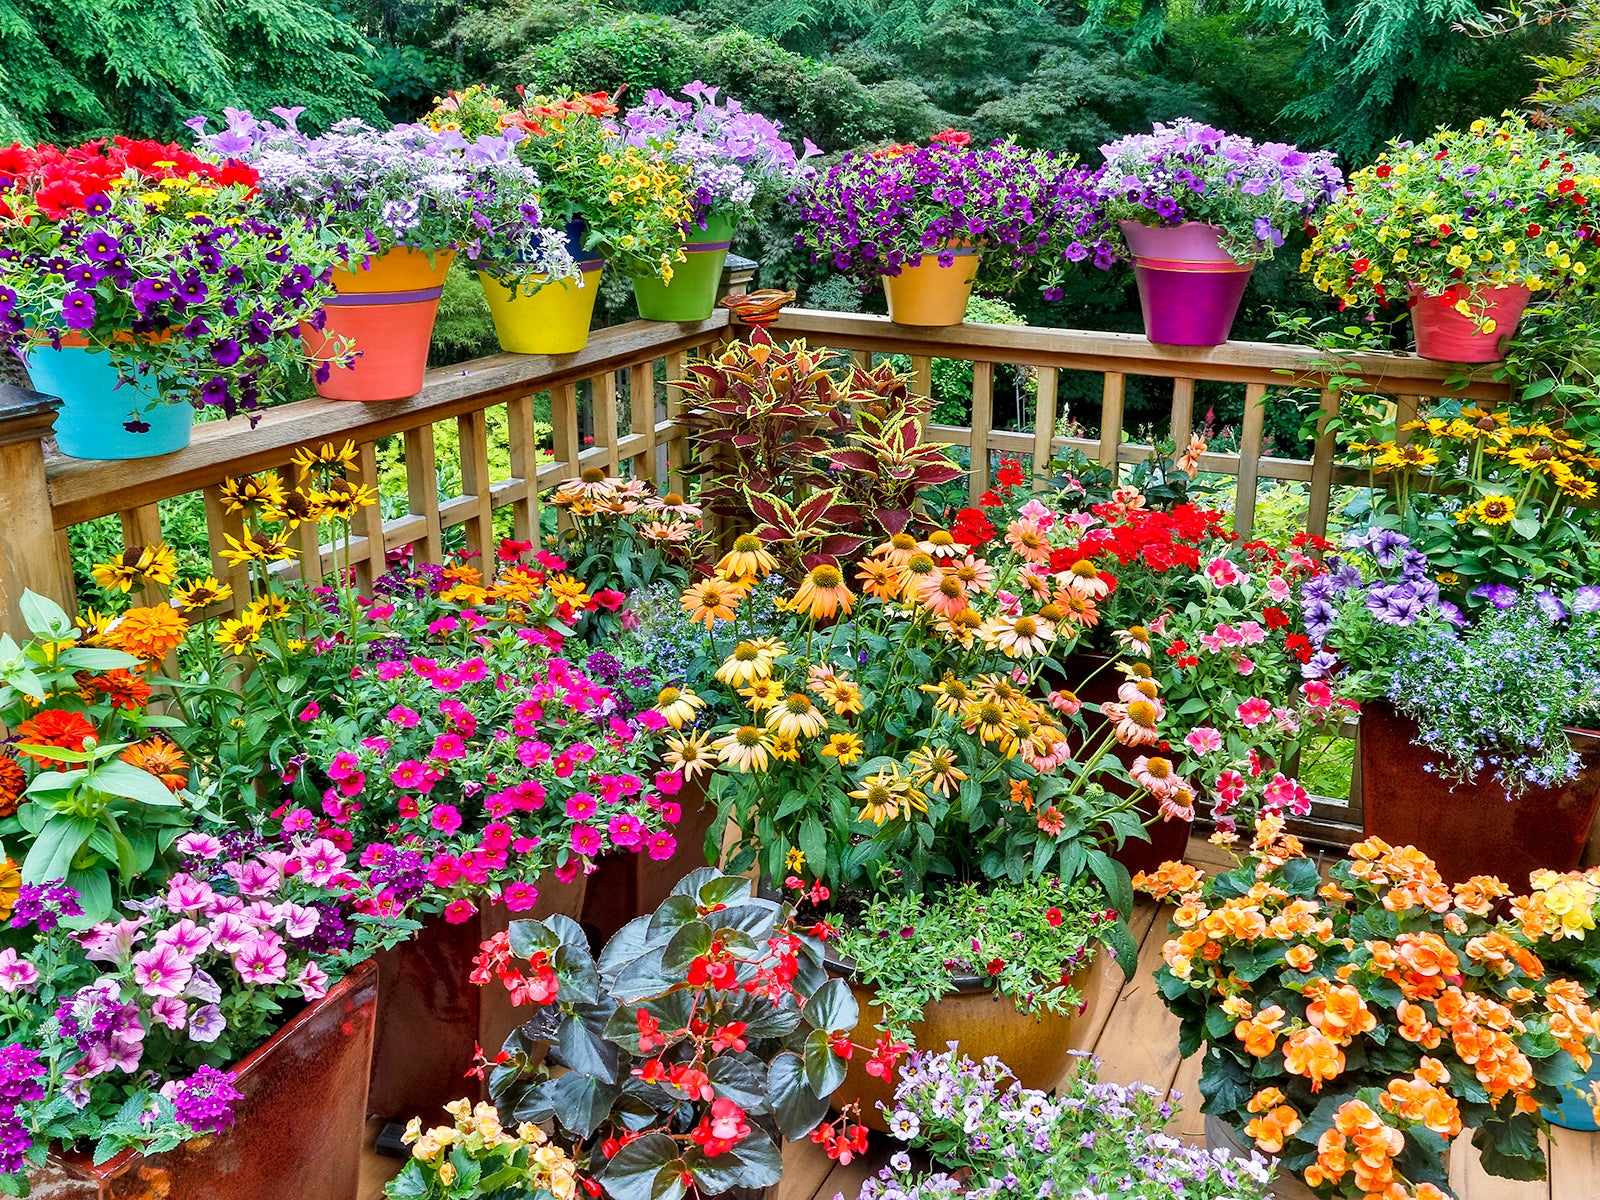 Colorful flowers and pots on deck